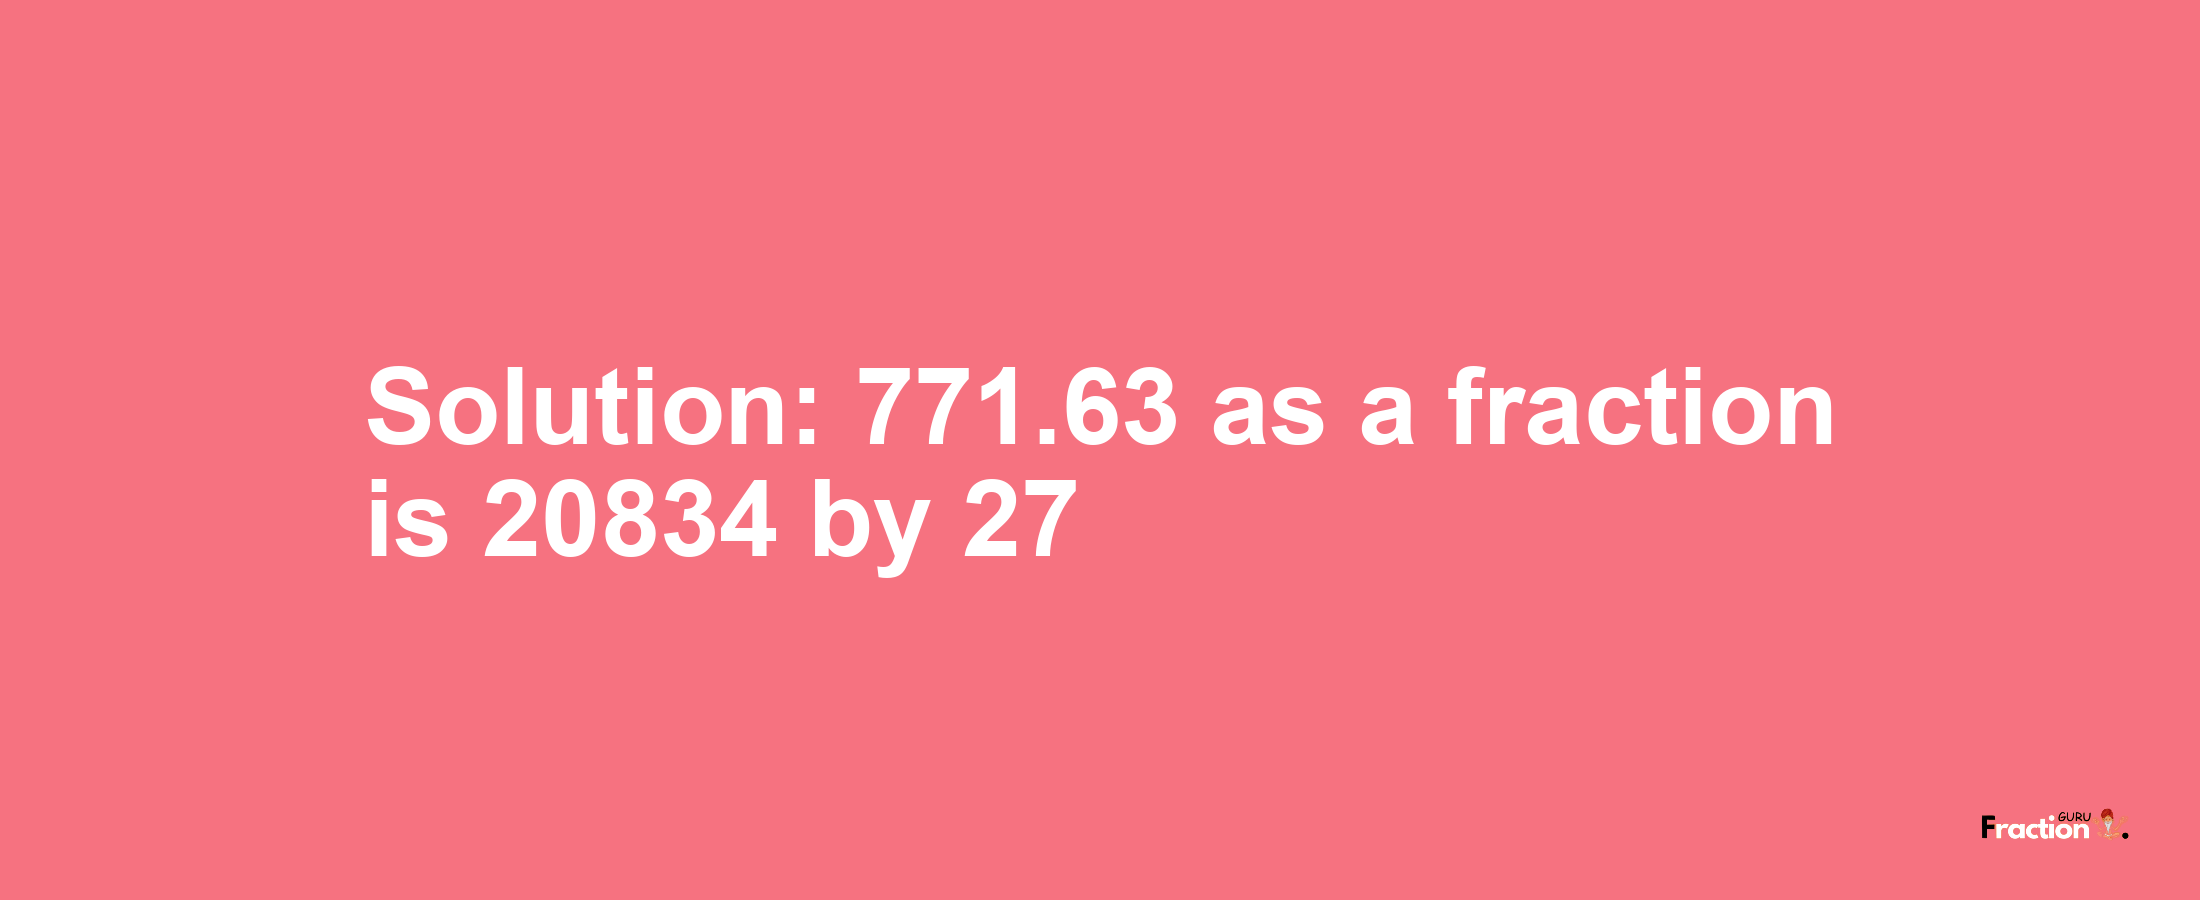 Solution:771.63 as a fraction is 20834/27